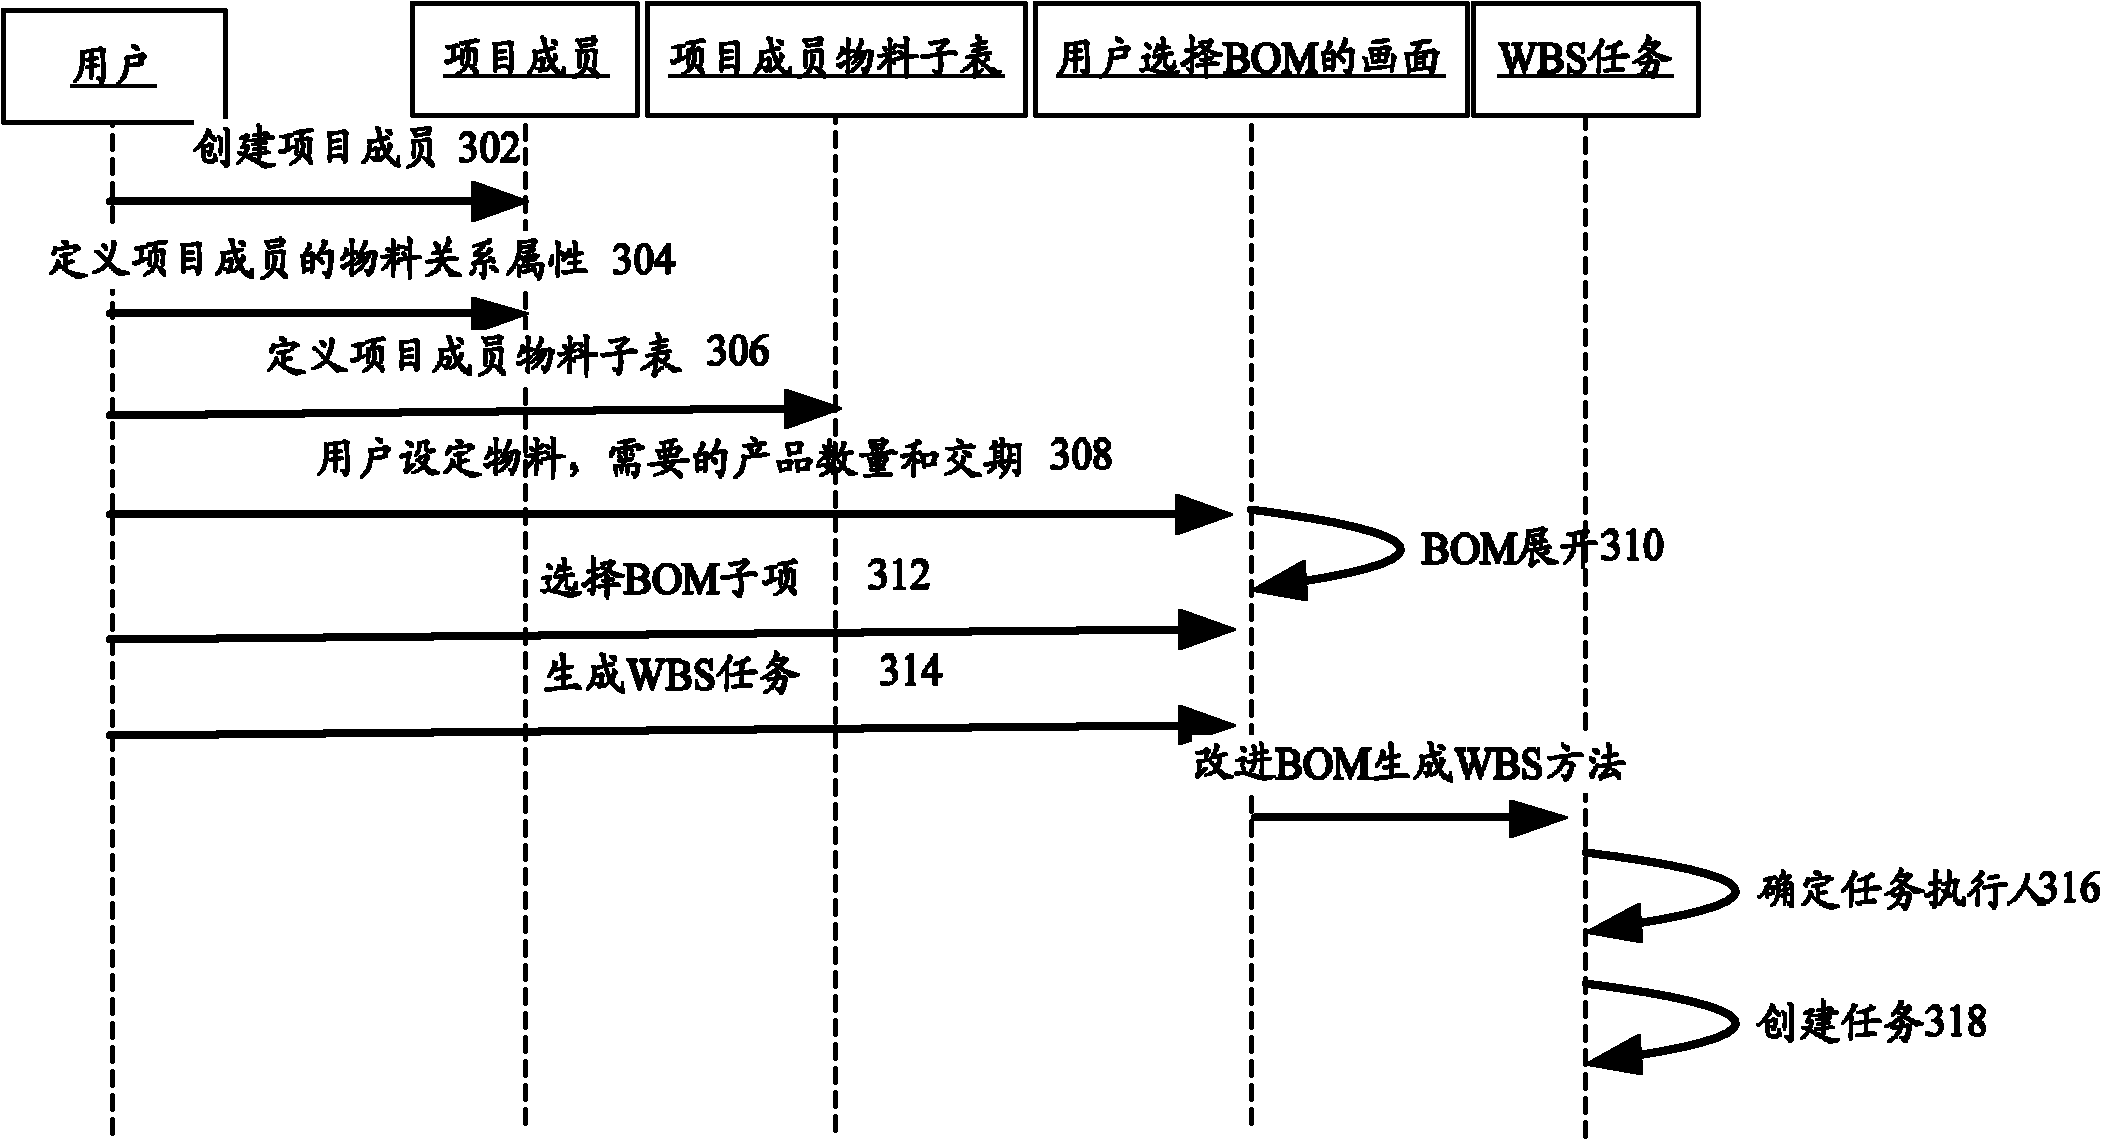 Method and system for matching task executor for work breakdown structure